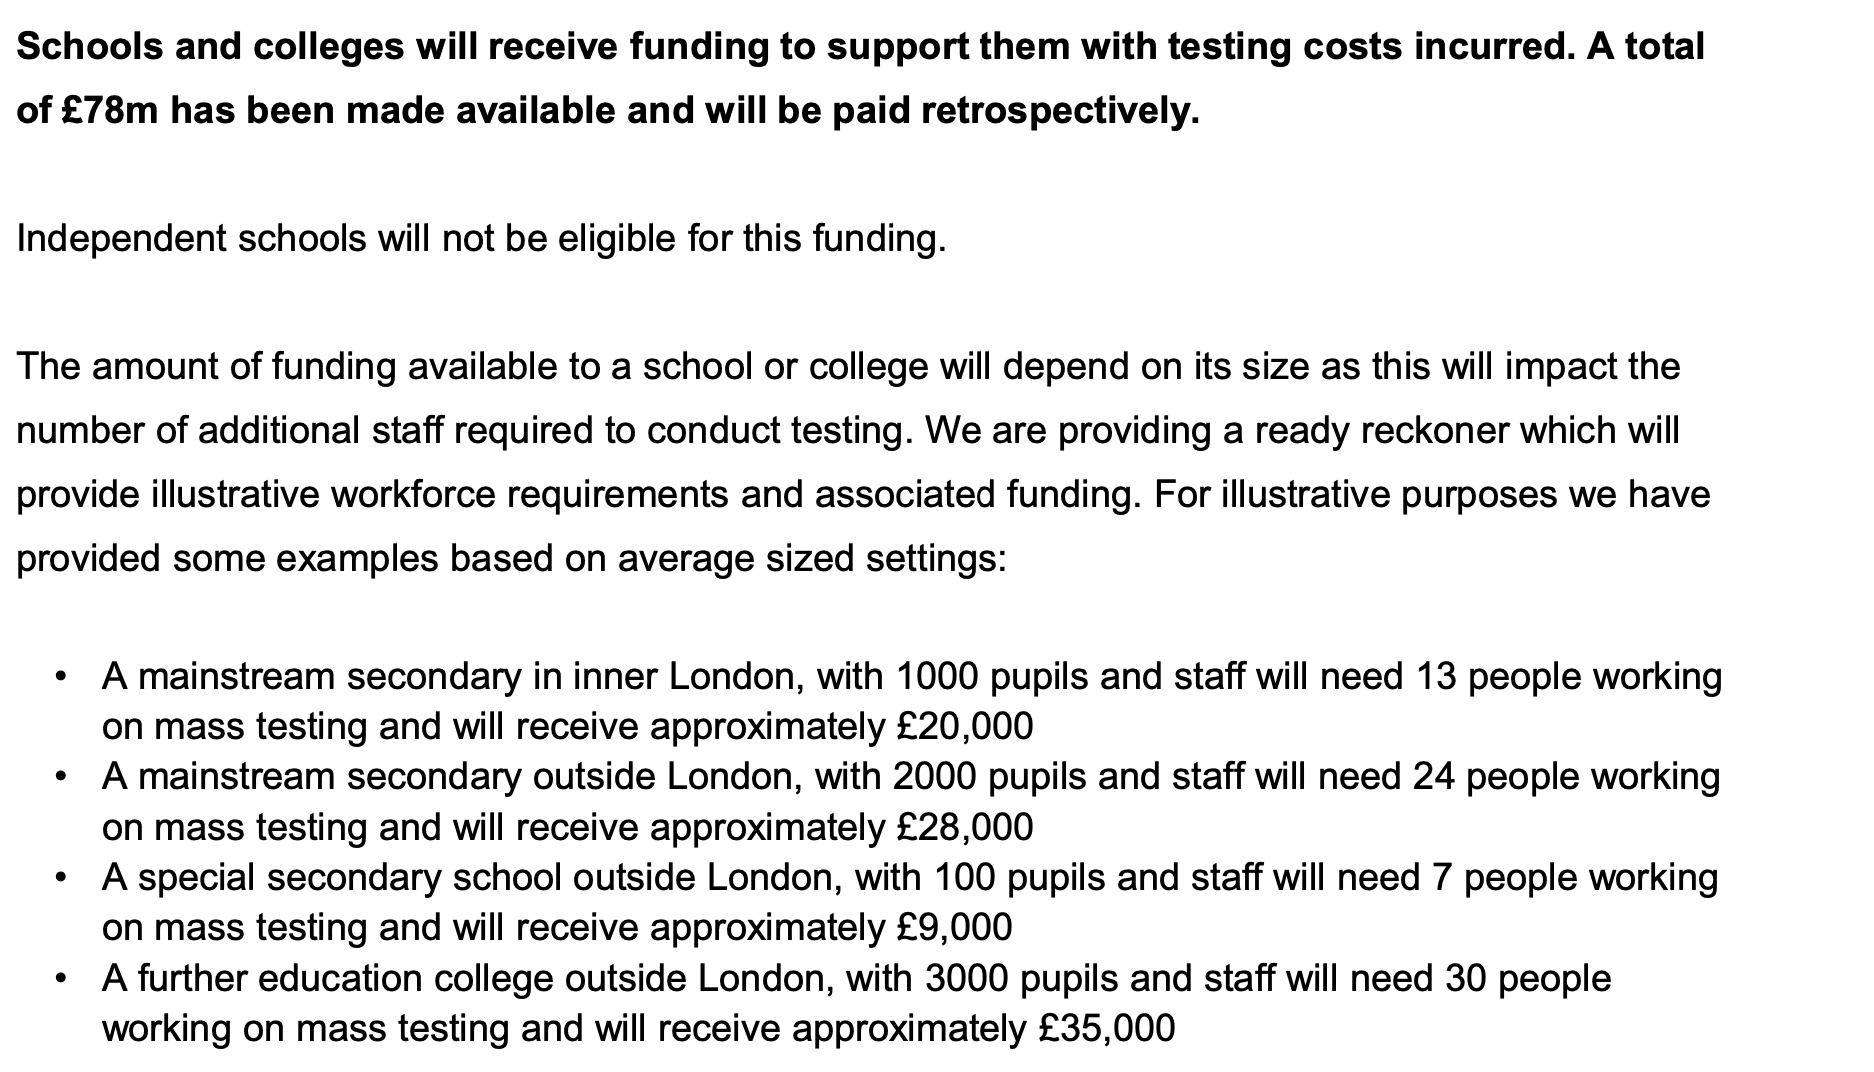 New guidance suggests large secondary school will need 24 people working on mass testing. 